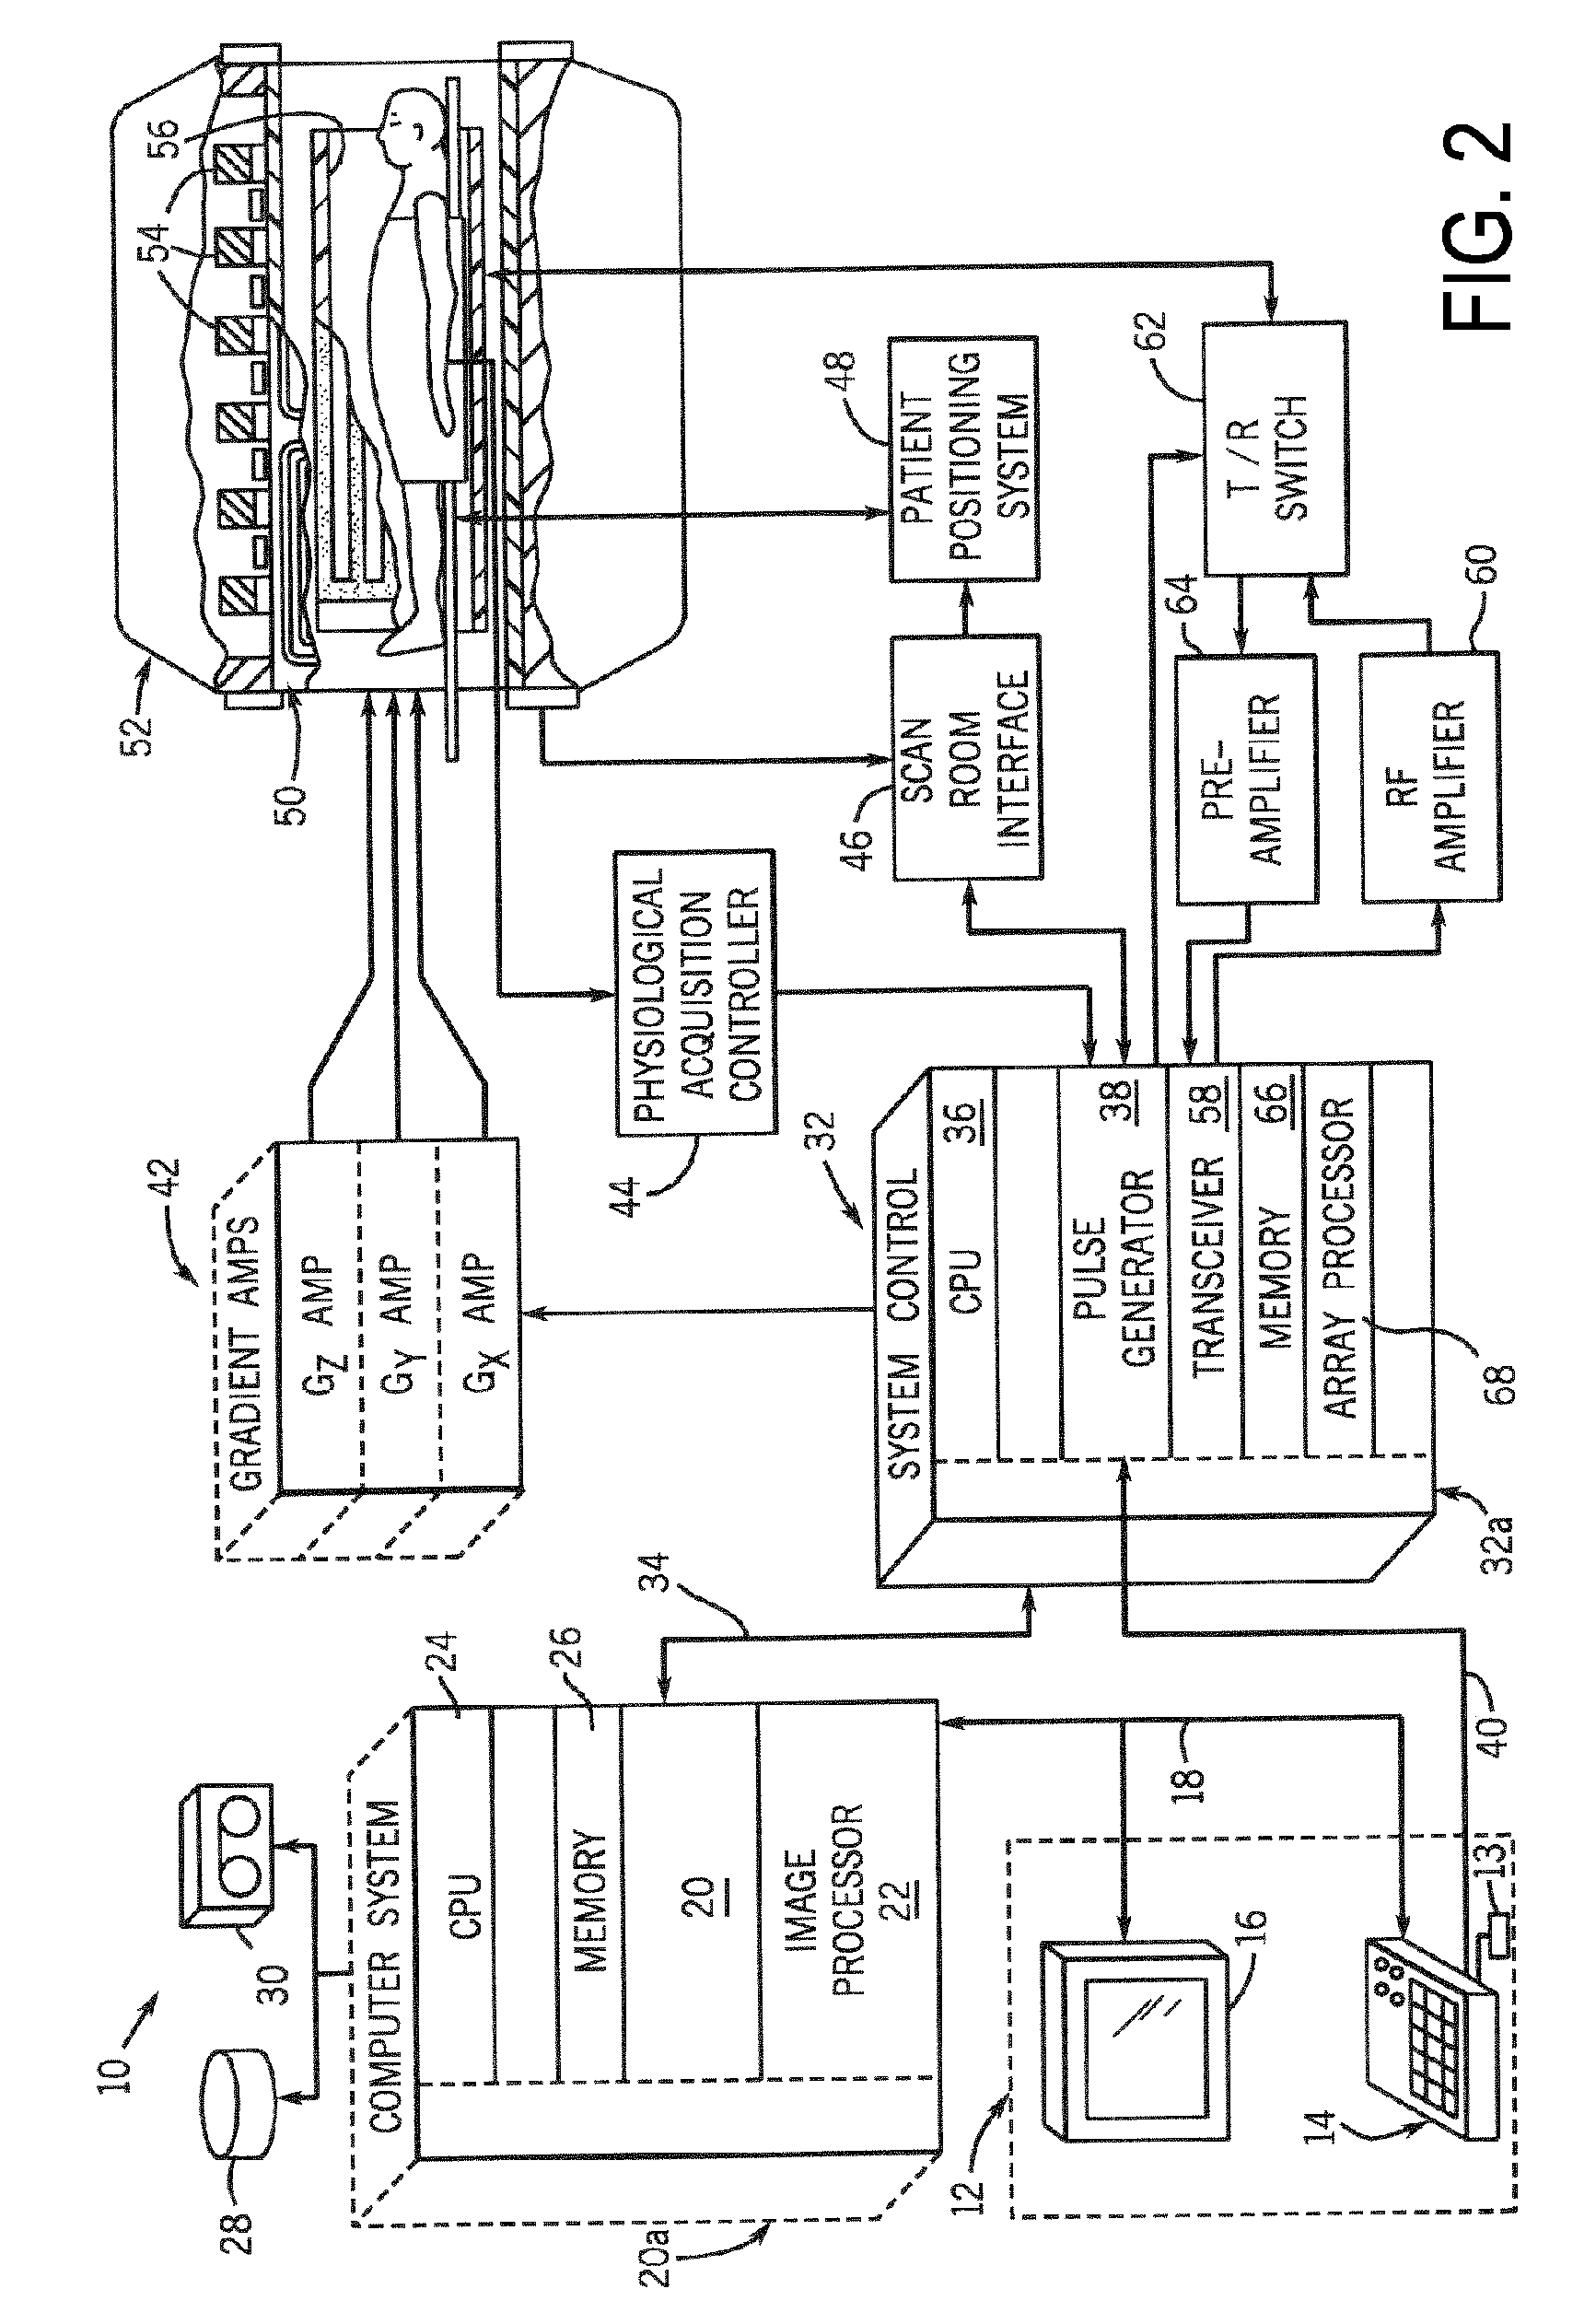 Apparatus and method of simultaneous fat suppression, magnetization transfer contrast, and spatial saturation for 3D time-of-flight imaging